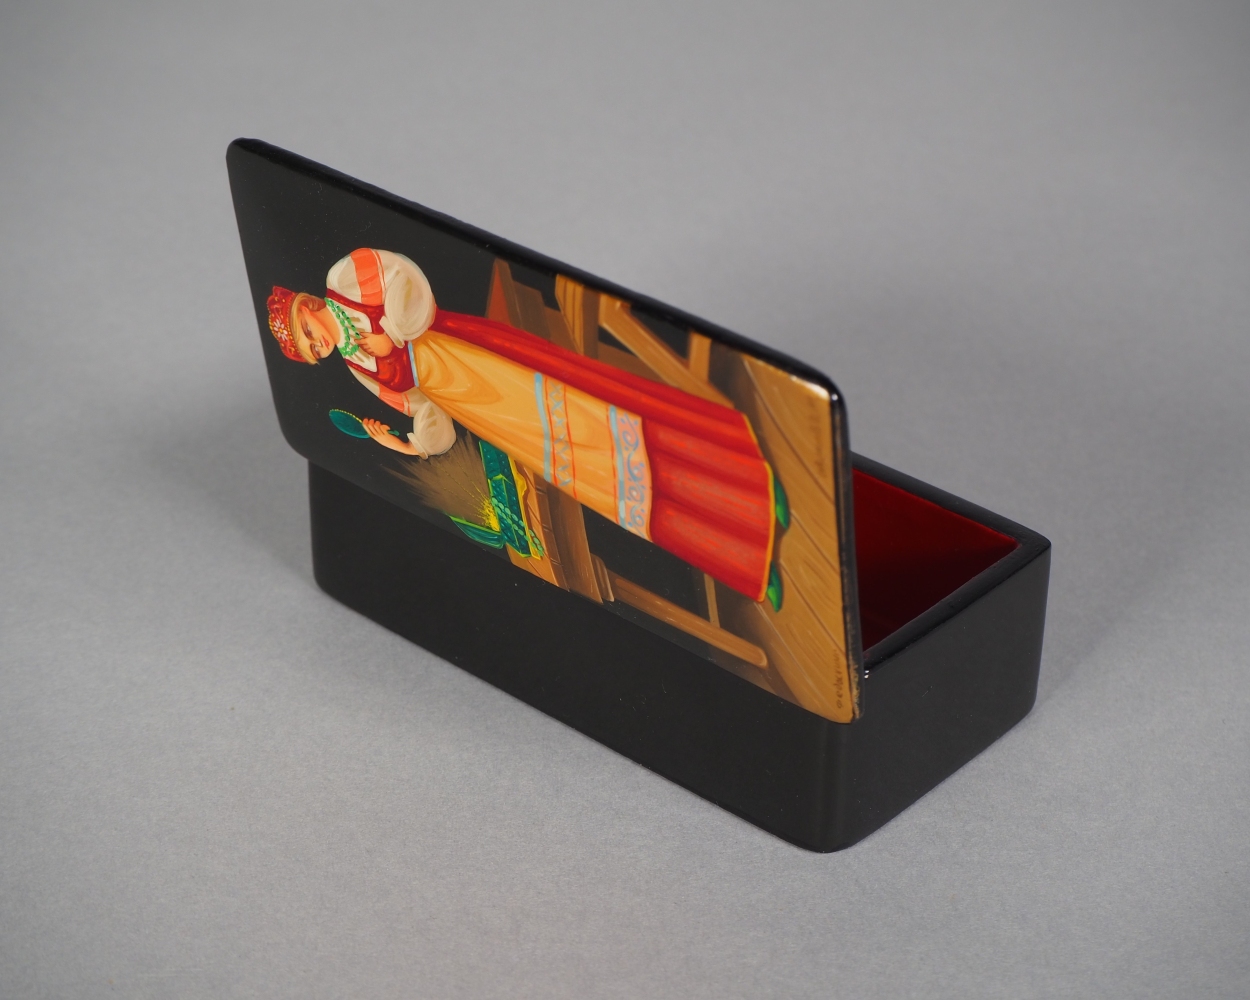 Russian lacquer box from Fedoskino, around 1900. - Image 3 of 3